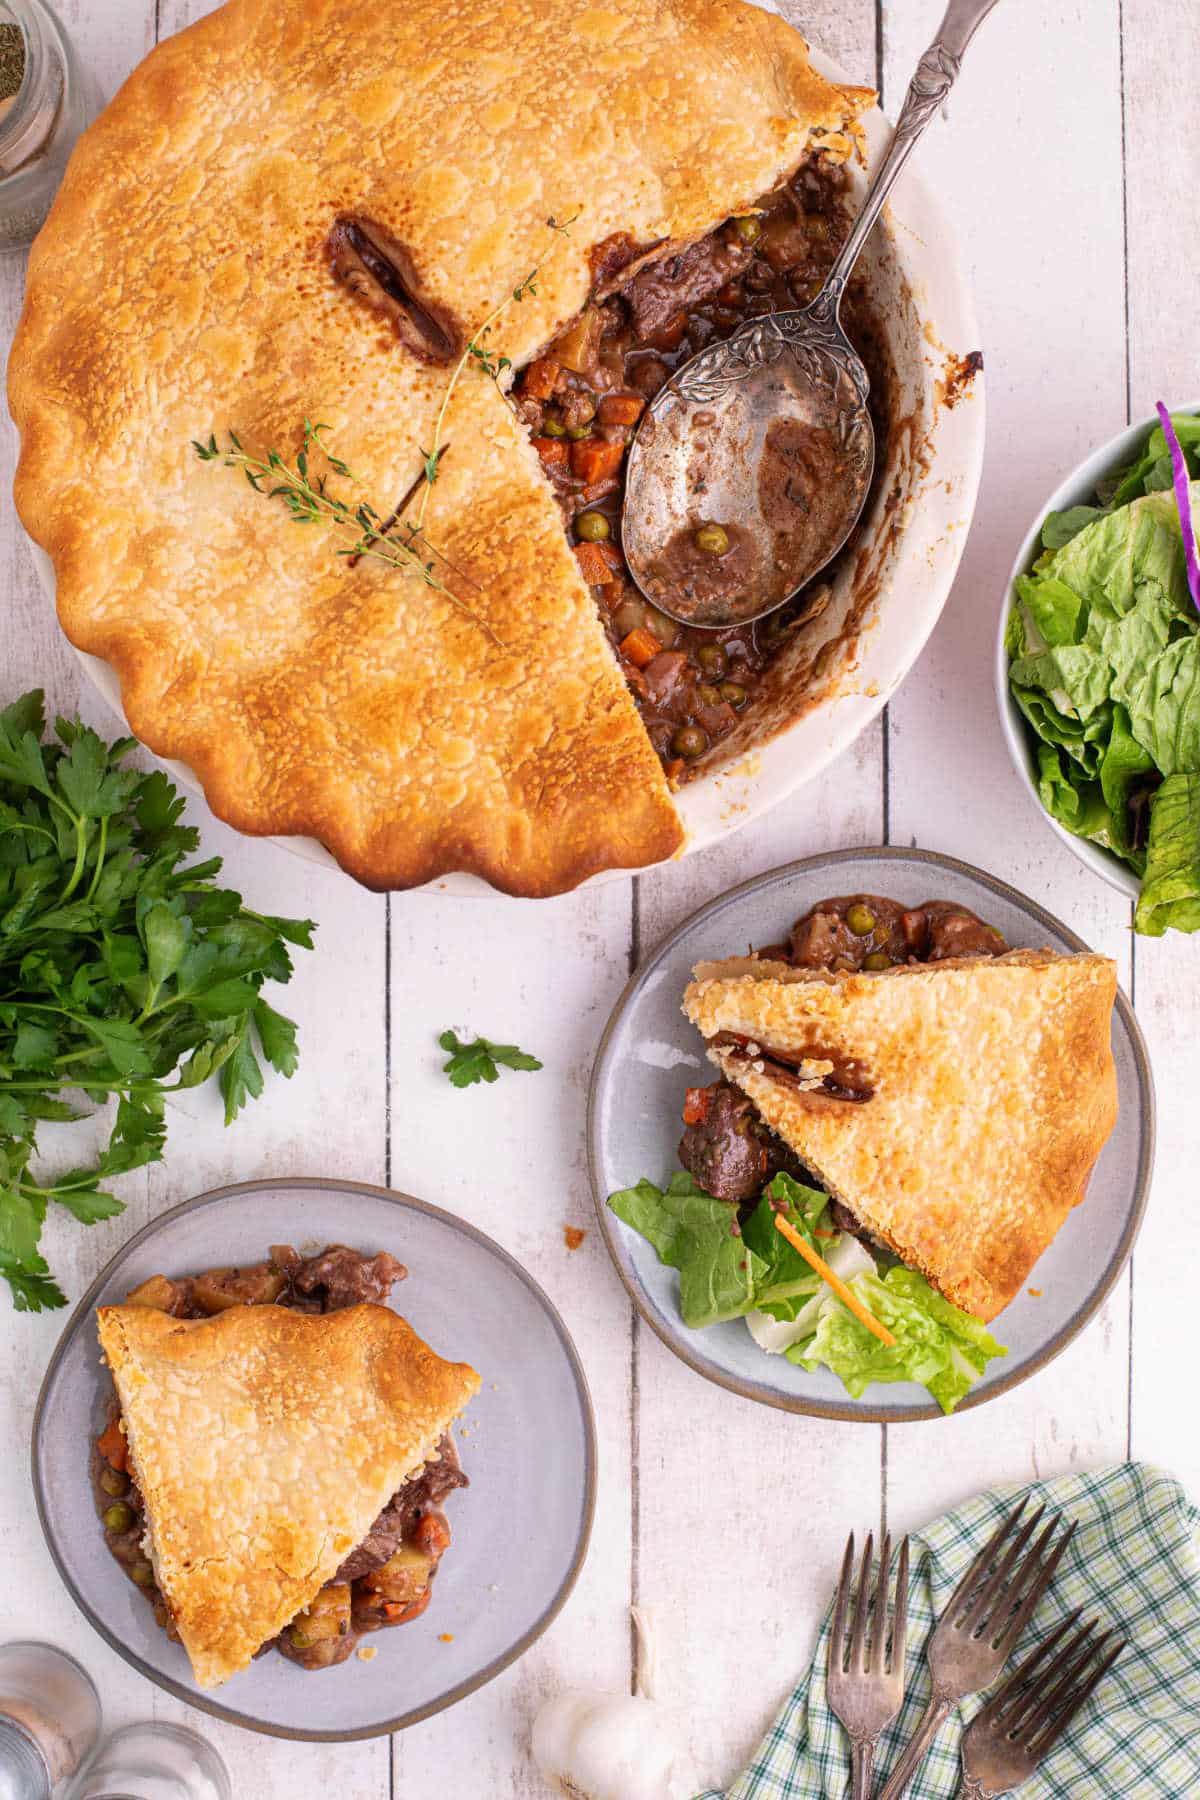 Overhead image of a beef pot pie with two slices on plates with some salad.